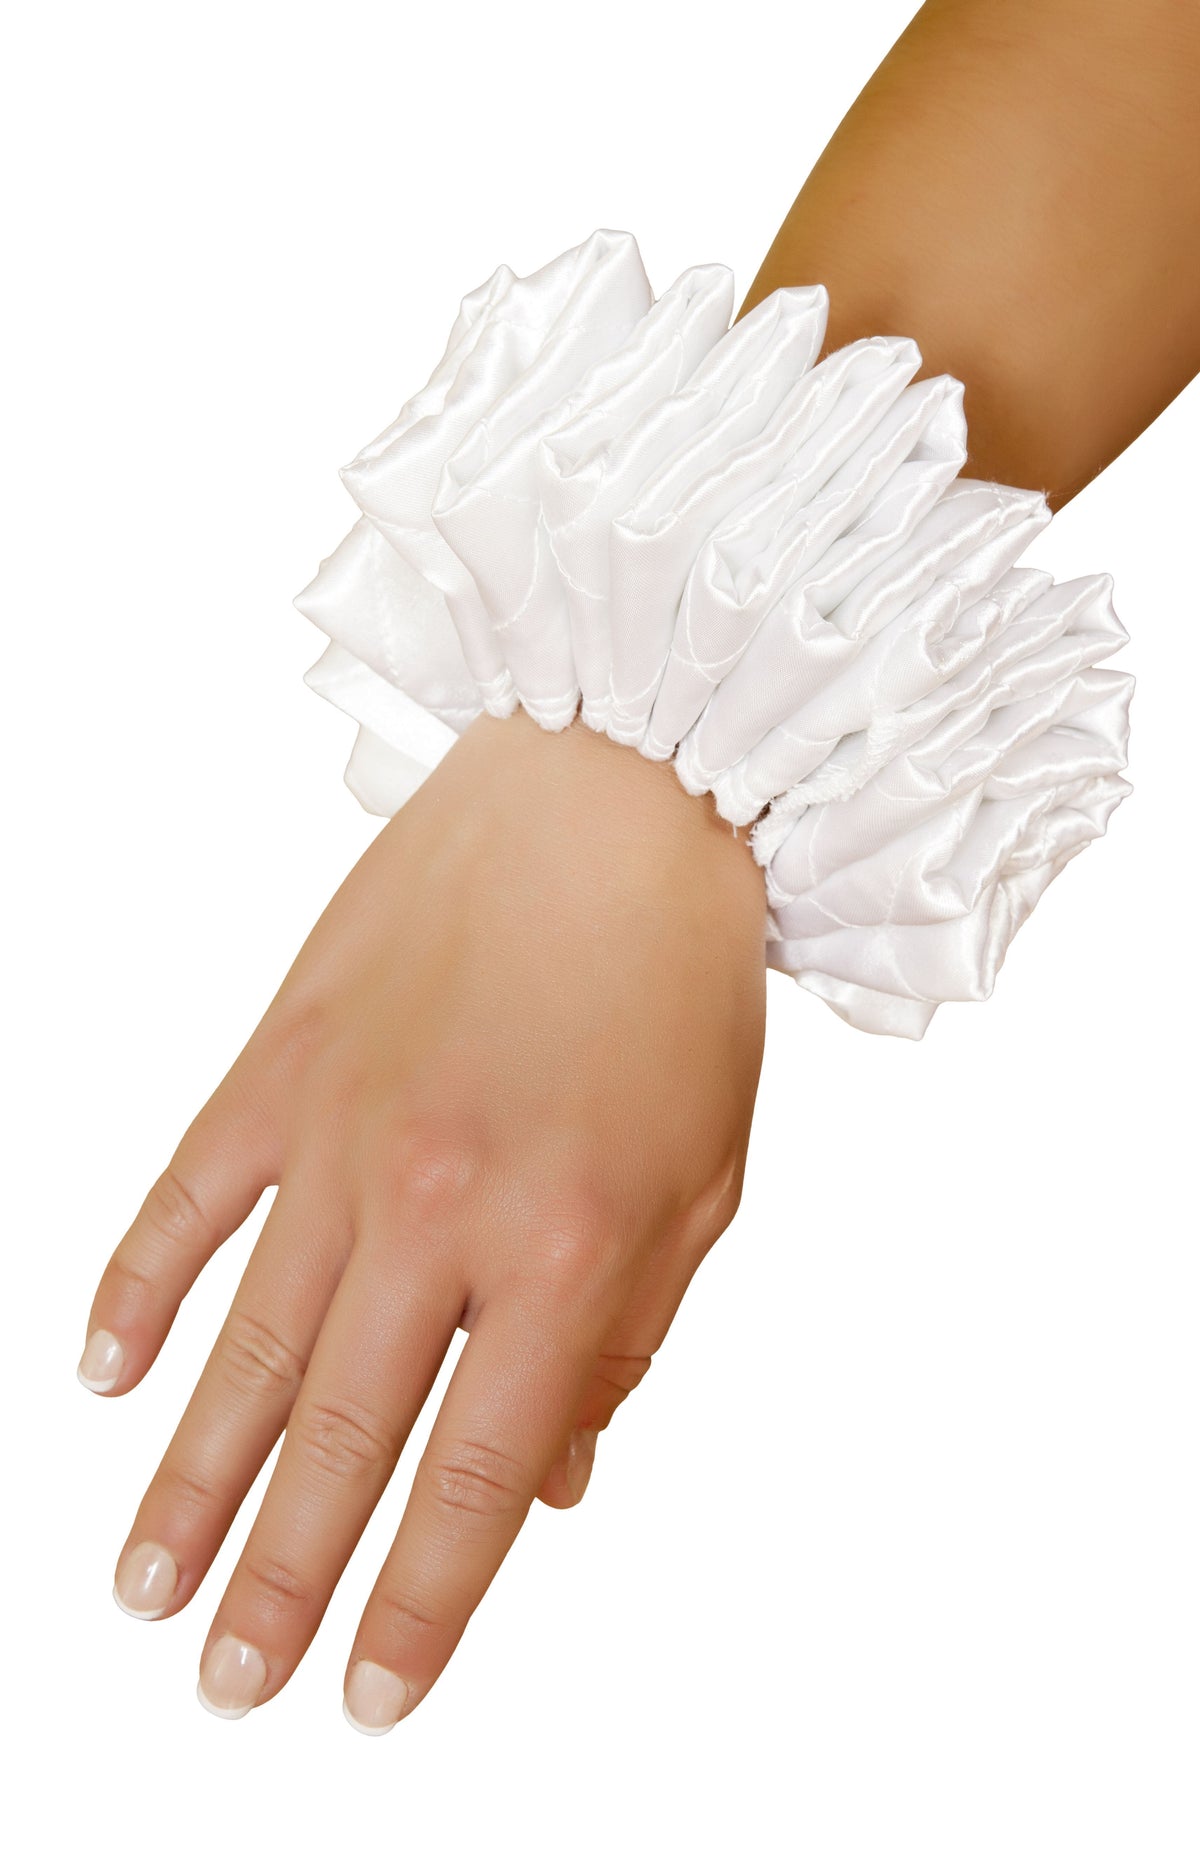 Roma WHITE / One Size WHITE RUFFLED JESTER CUFFS SHC-4372-R Apparel &amp; Accessories &gt; Costumes &amp; Accessories &gt; Costumes